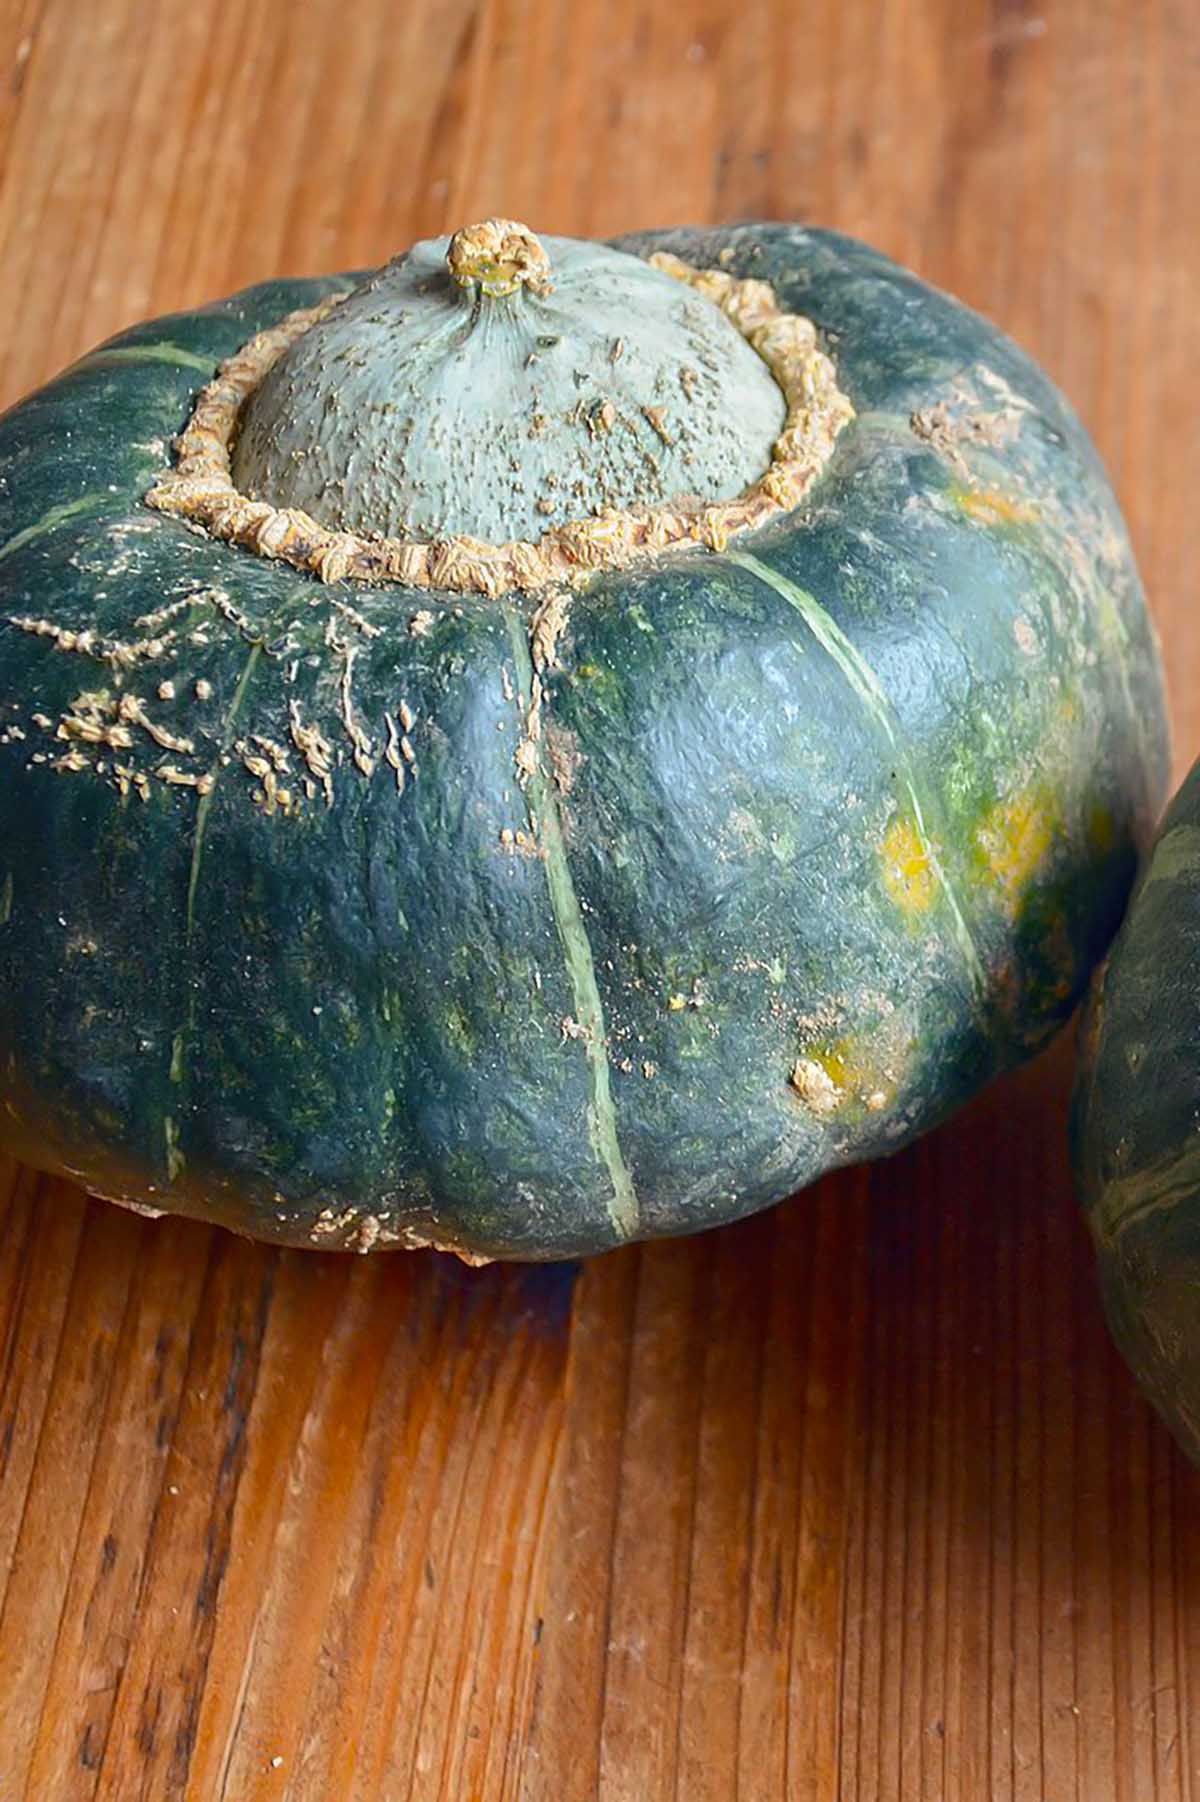 buttercup squash on a kitchen counter